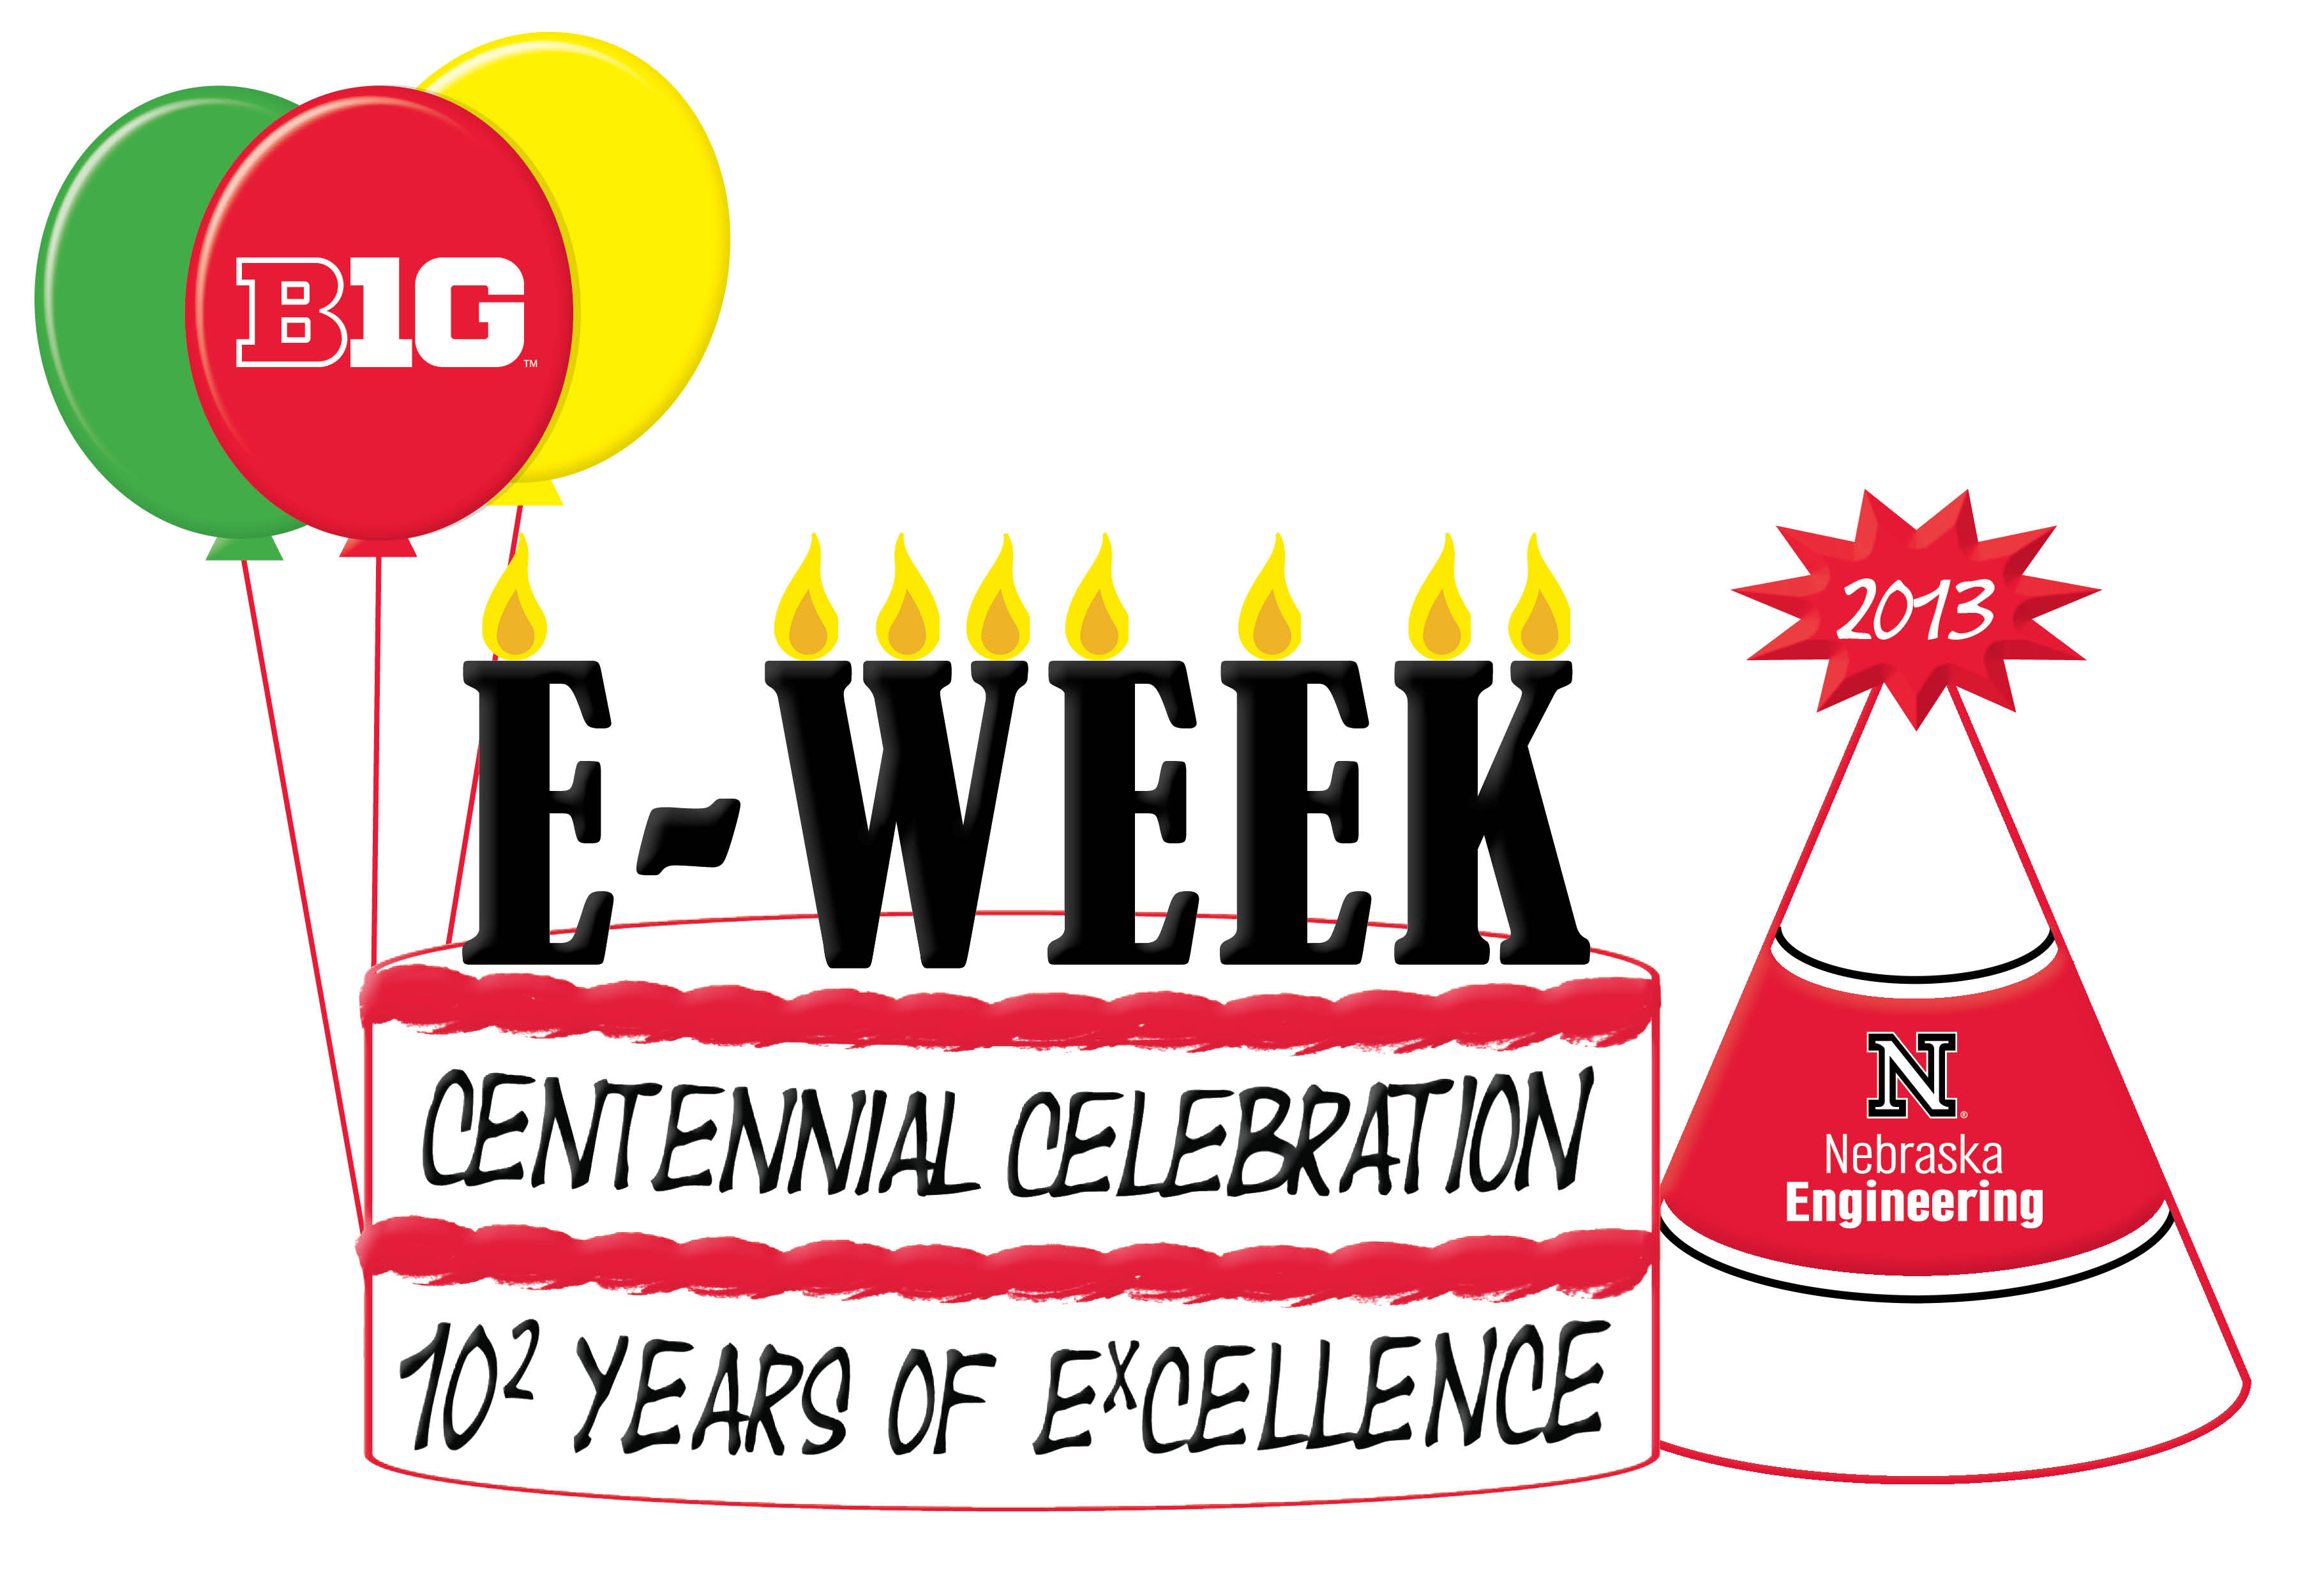 Win iPad, other prizes in UNL E-Week 2013